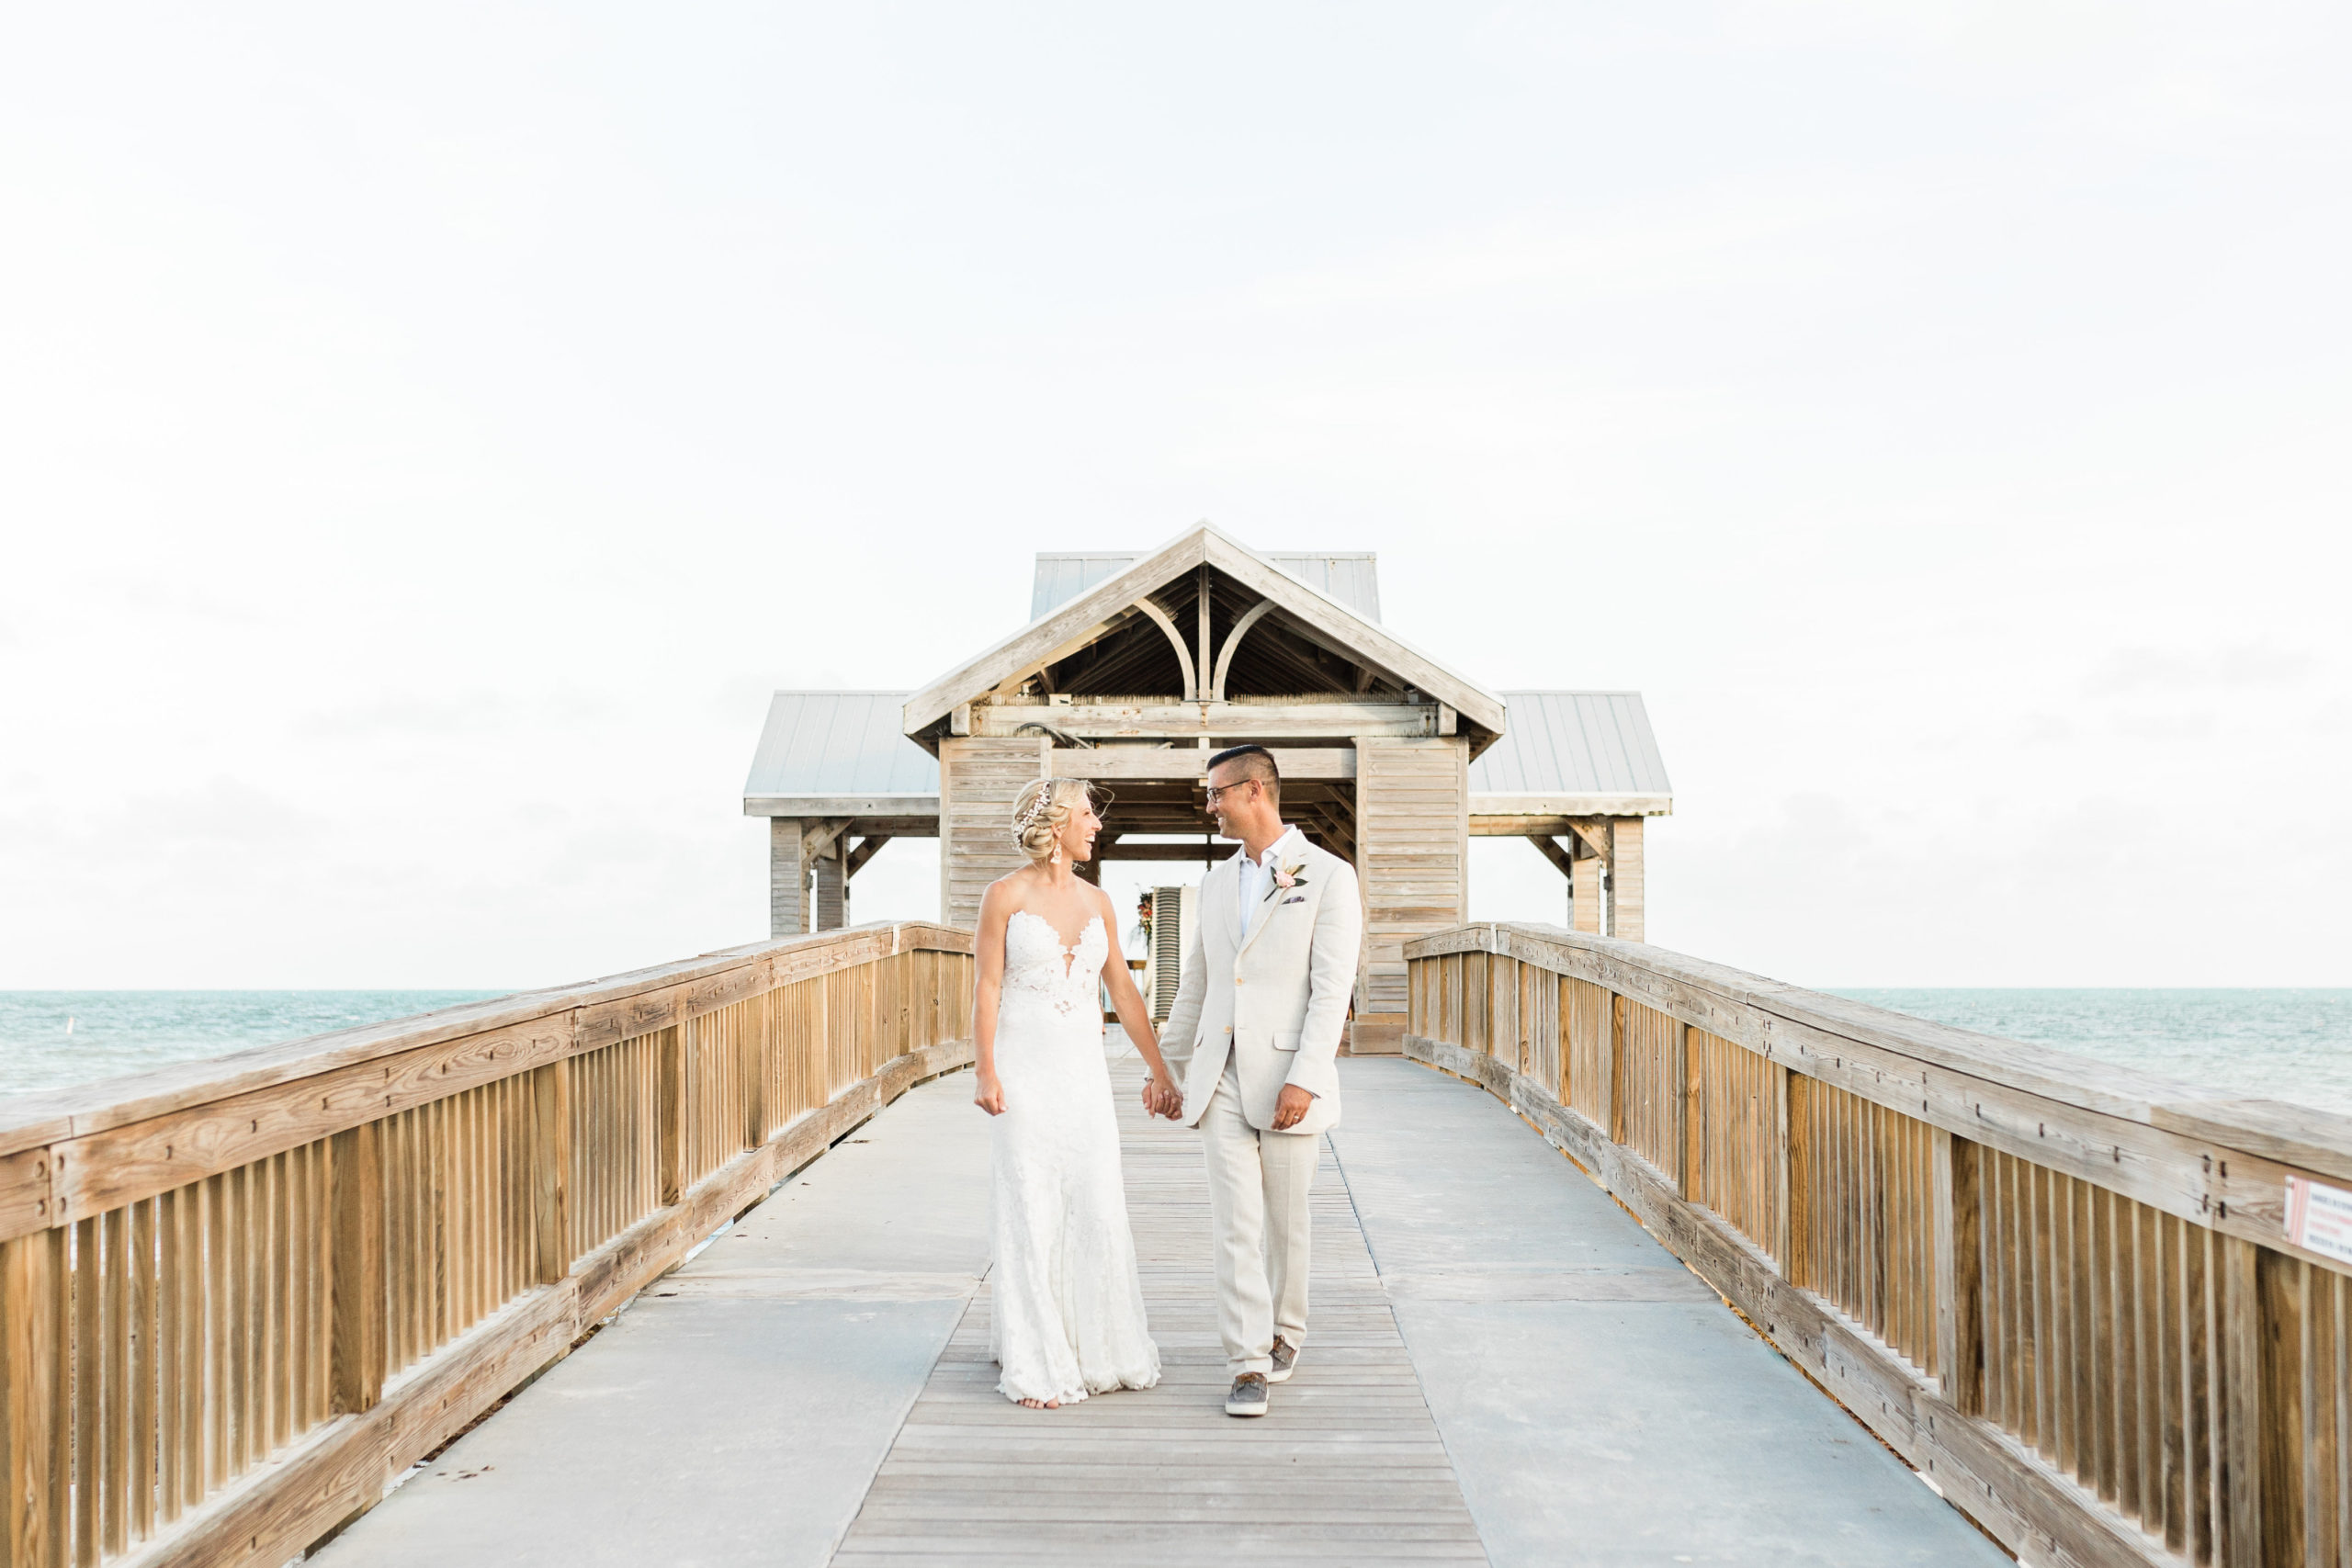 A guide to getting married in the Florida Keys